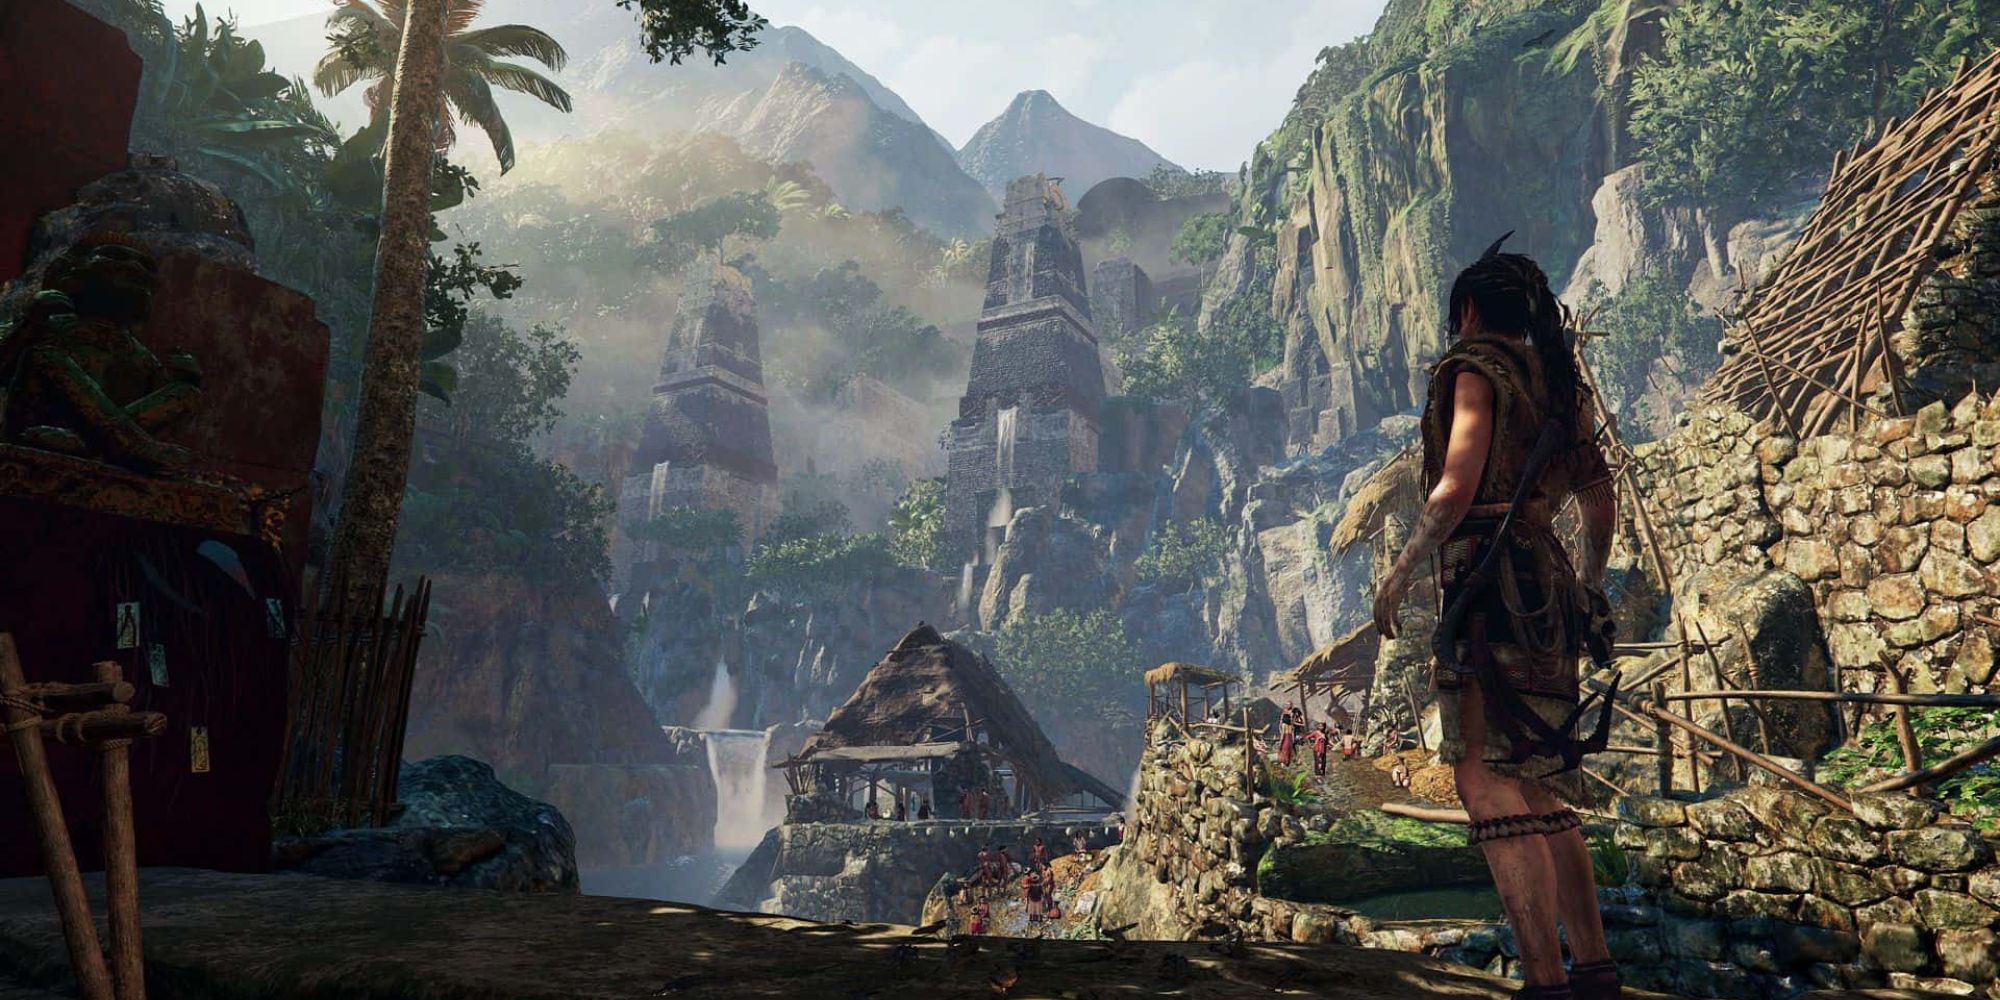 Lara Croft overlooking a temple ahead of her in the Tomb Raider series